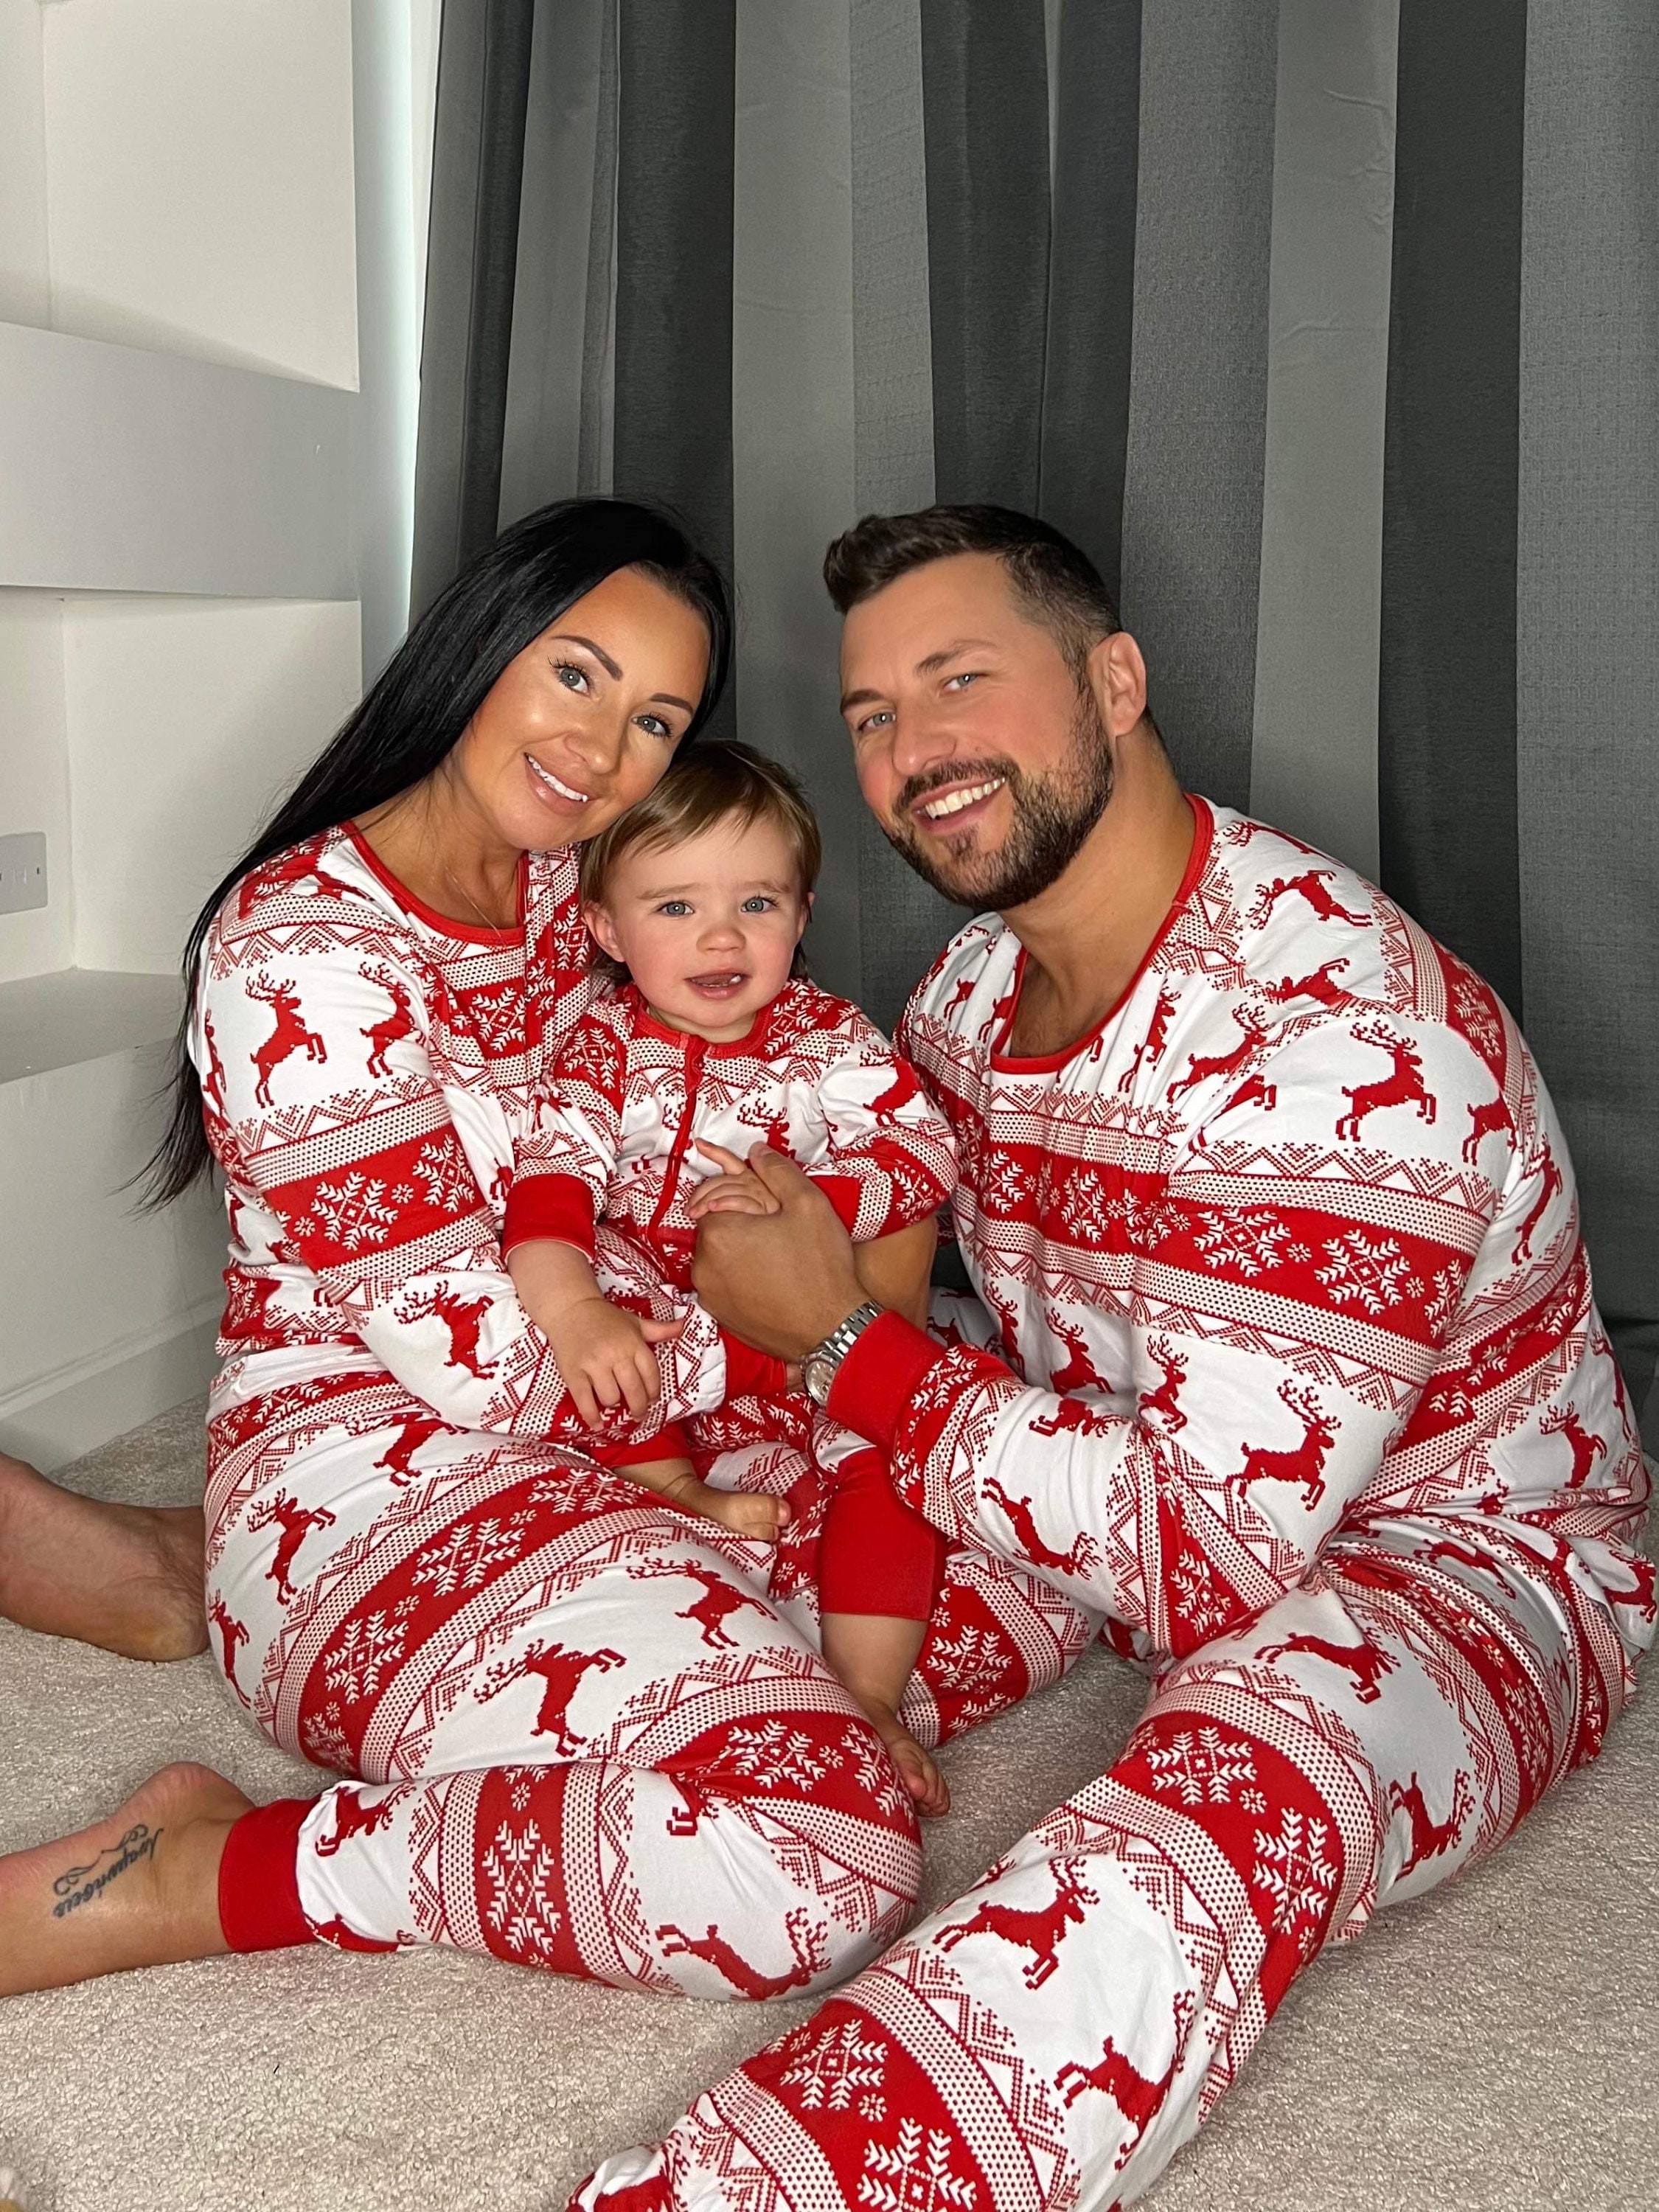 Chestnuts Couples Matching Shirt | Couple Valentine Gift Shirt Ideas -  Family Christmas Pajamas By Jenny